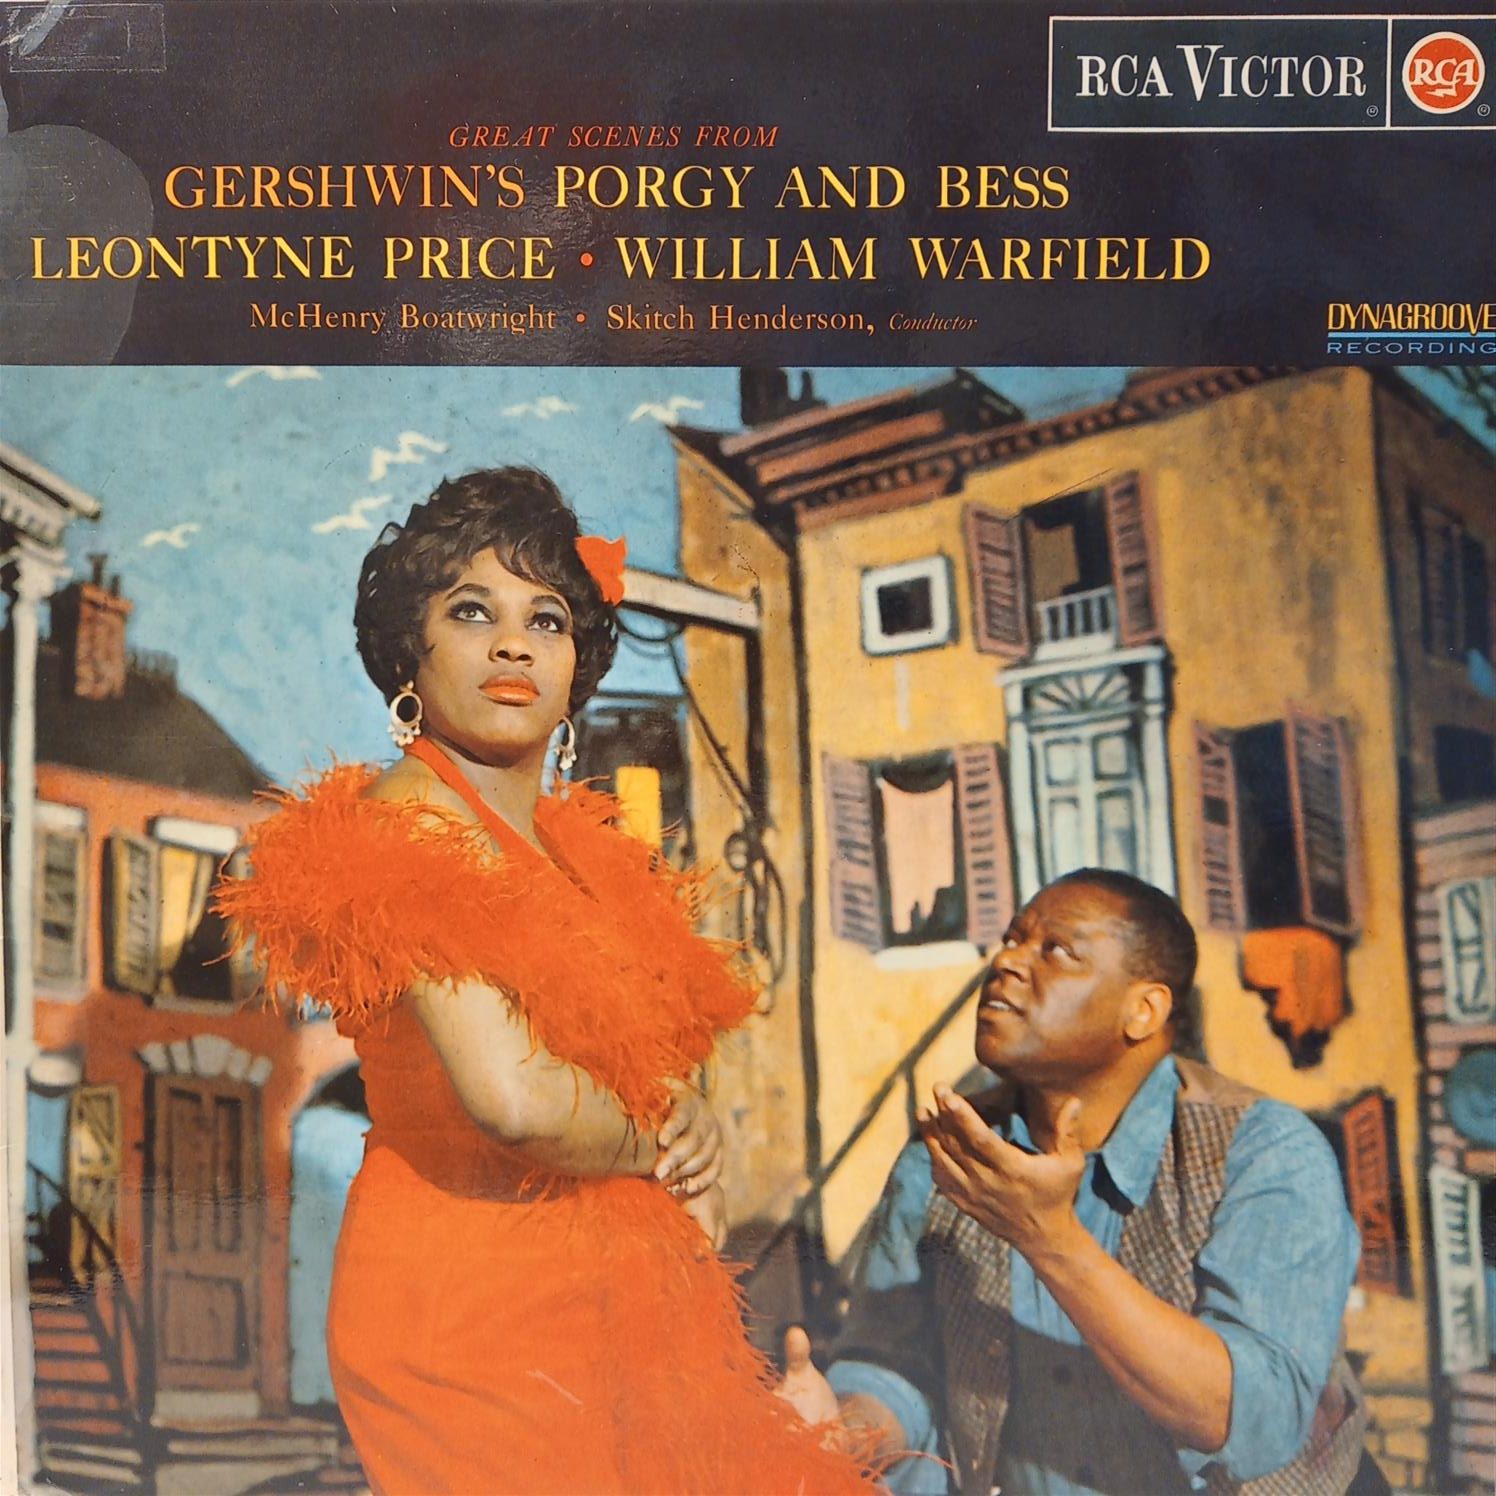 GERSHWIN – GREAT SCENES FROM PORGY AND BESS ON